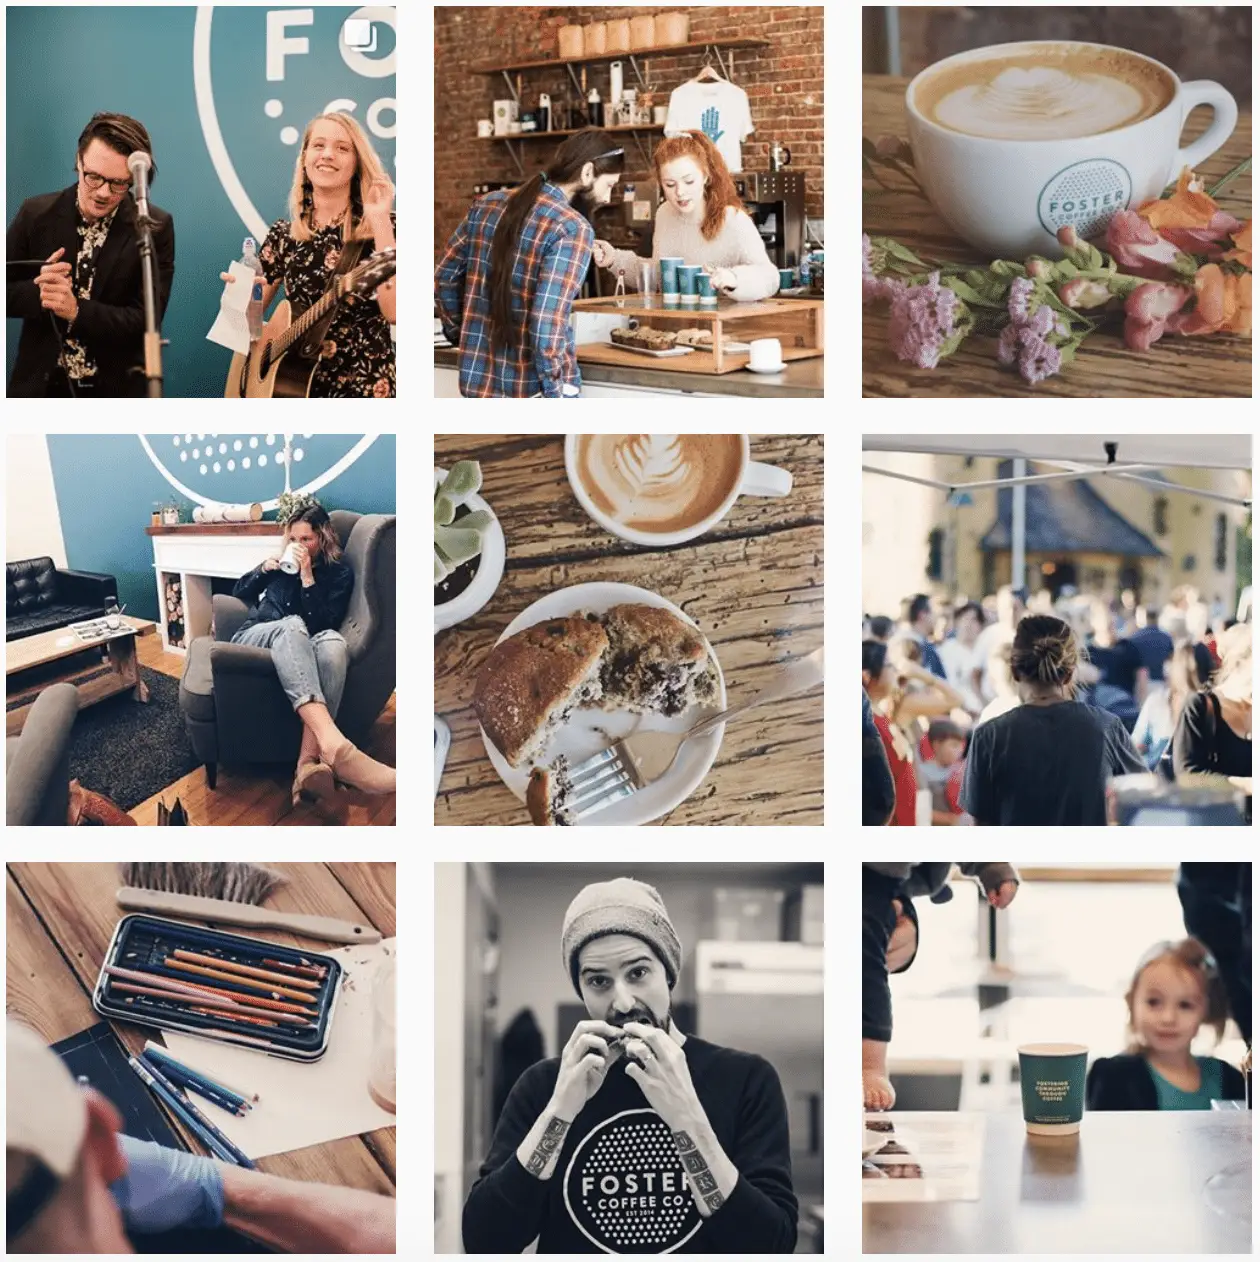 Leverage social media for scaling your coffee business